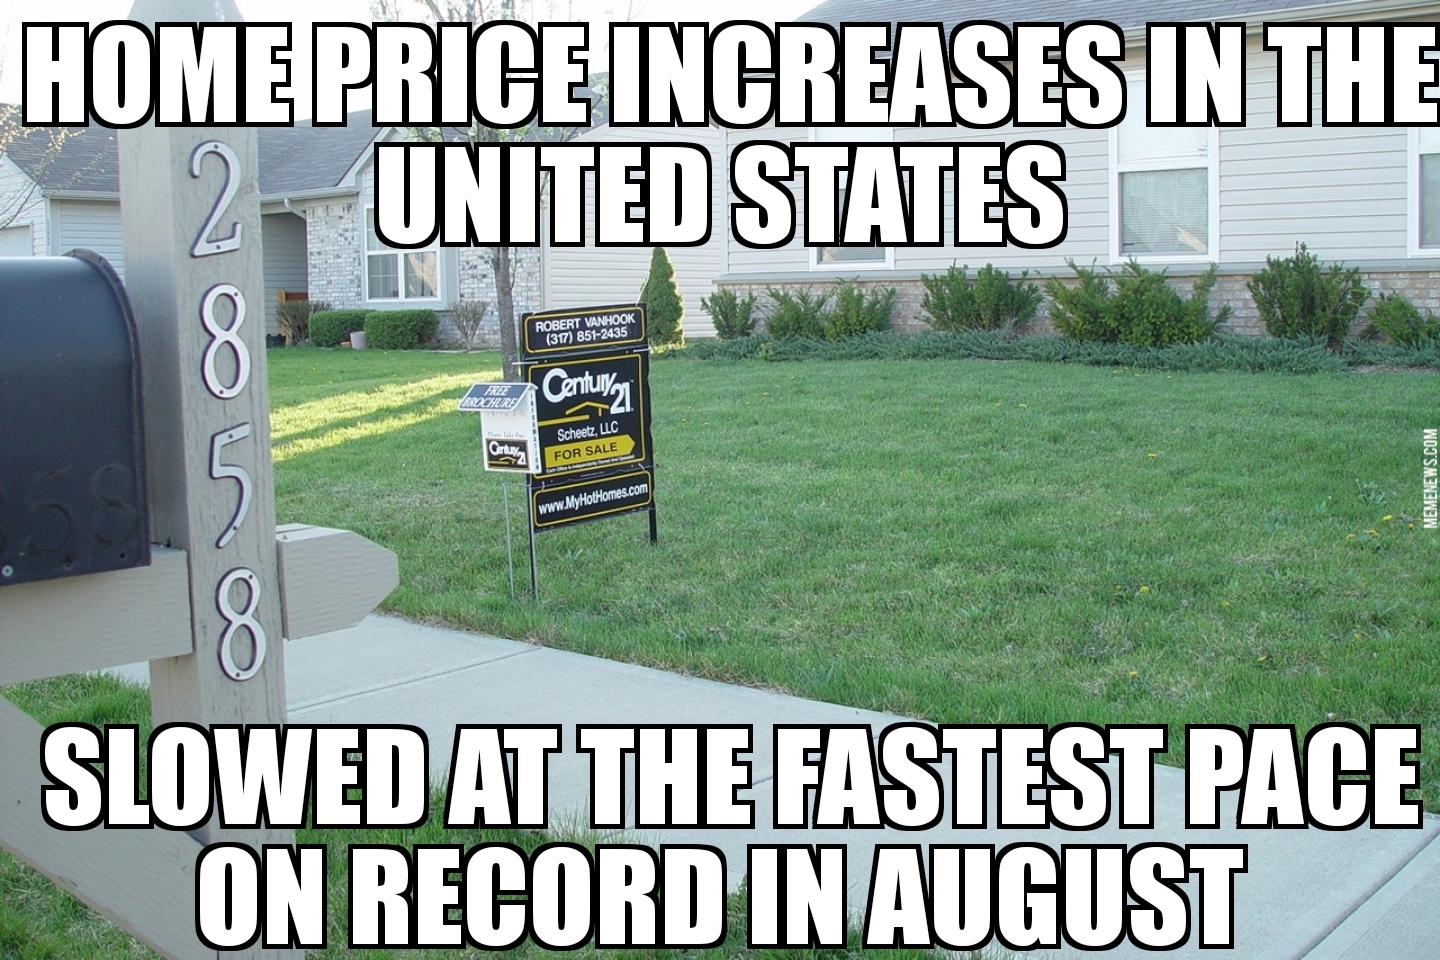 U.S. home prices ease